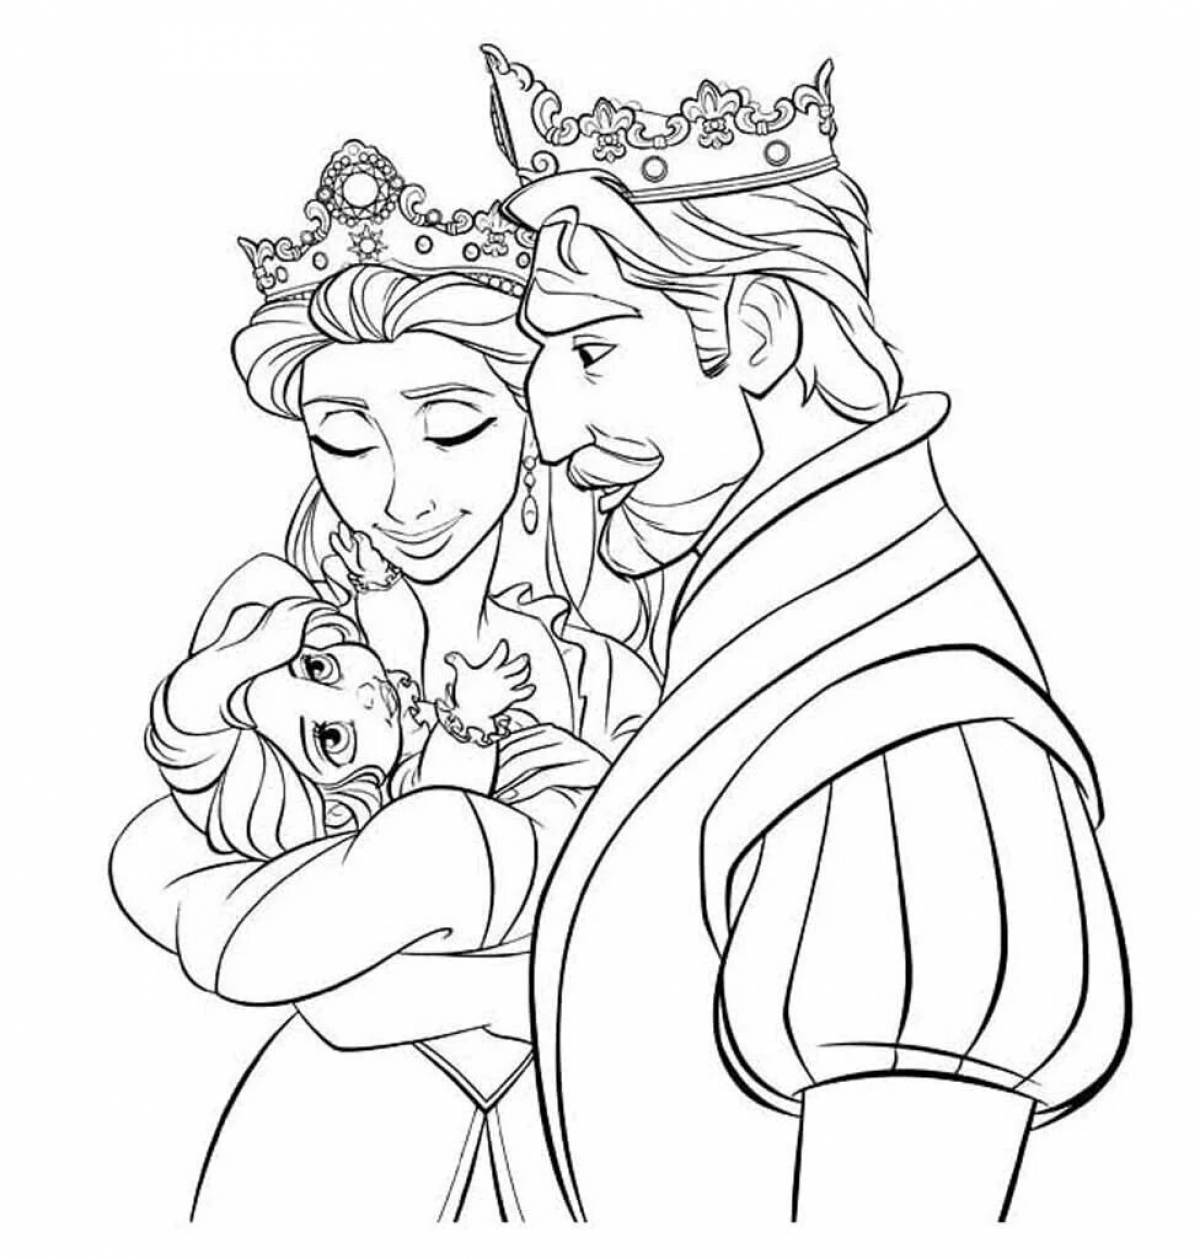 Palace king and queen coloring page